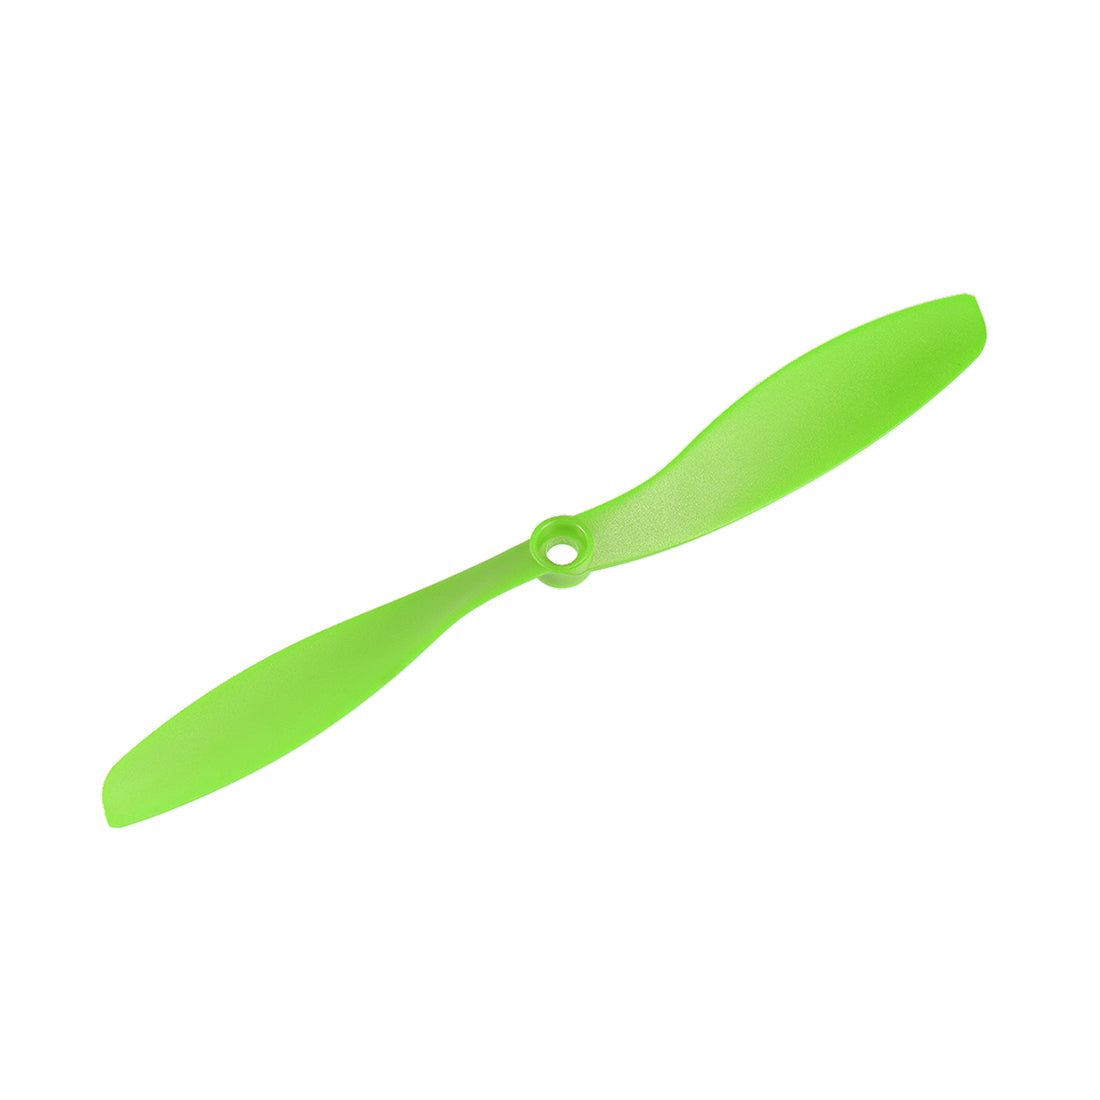 uxcell Uxcell RC Propellers CW CCW 8045 8x4.5 Inch 2-Vane Fixed-Wing, Nylon Green 2 Pair with Adapter Rings